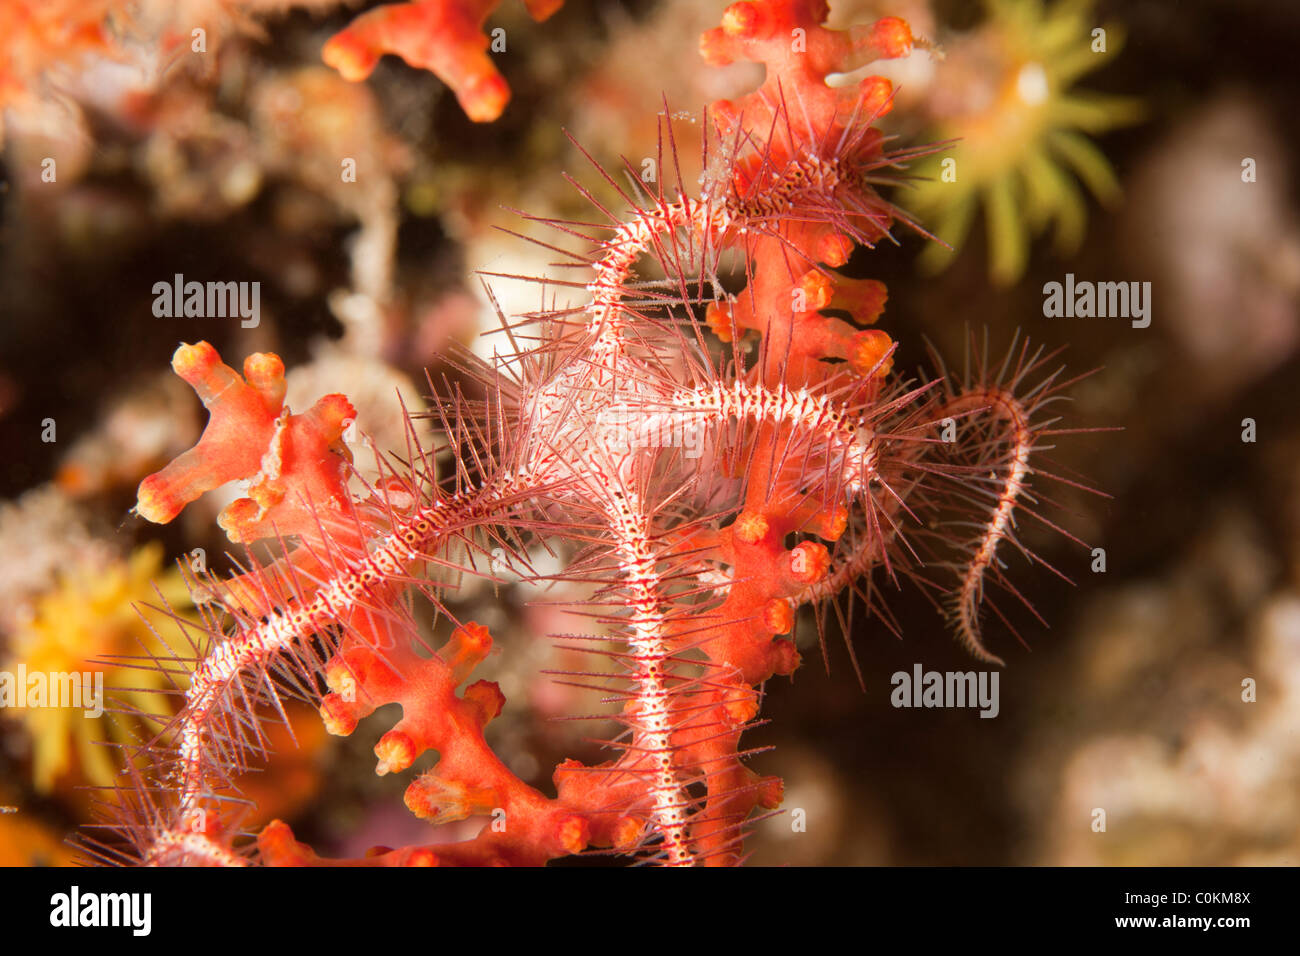 A beautiful red and white Brittle Star (Ophiothrix sp.) wraped around coral on a a tropical reef Stock Photo